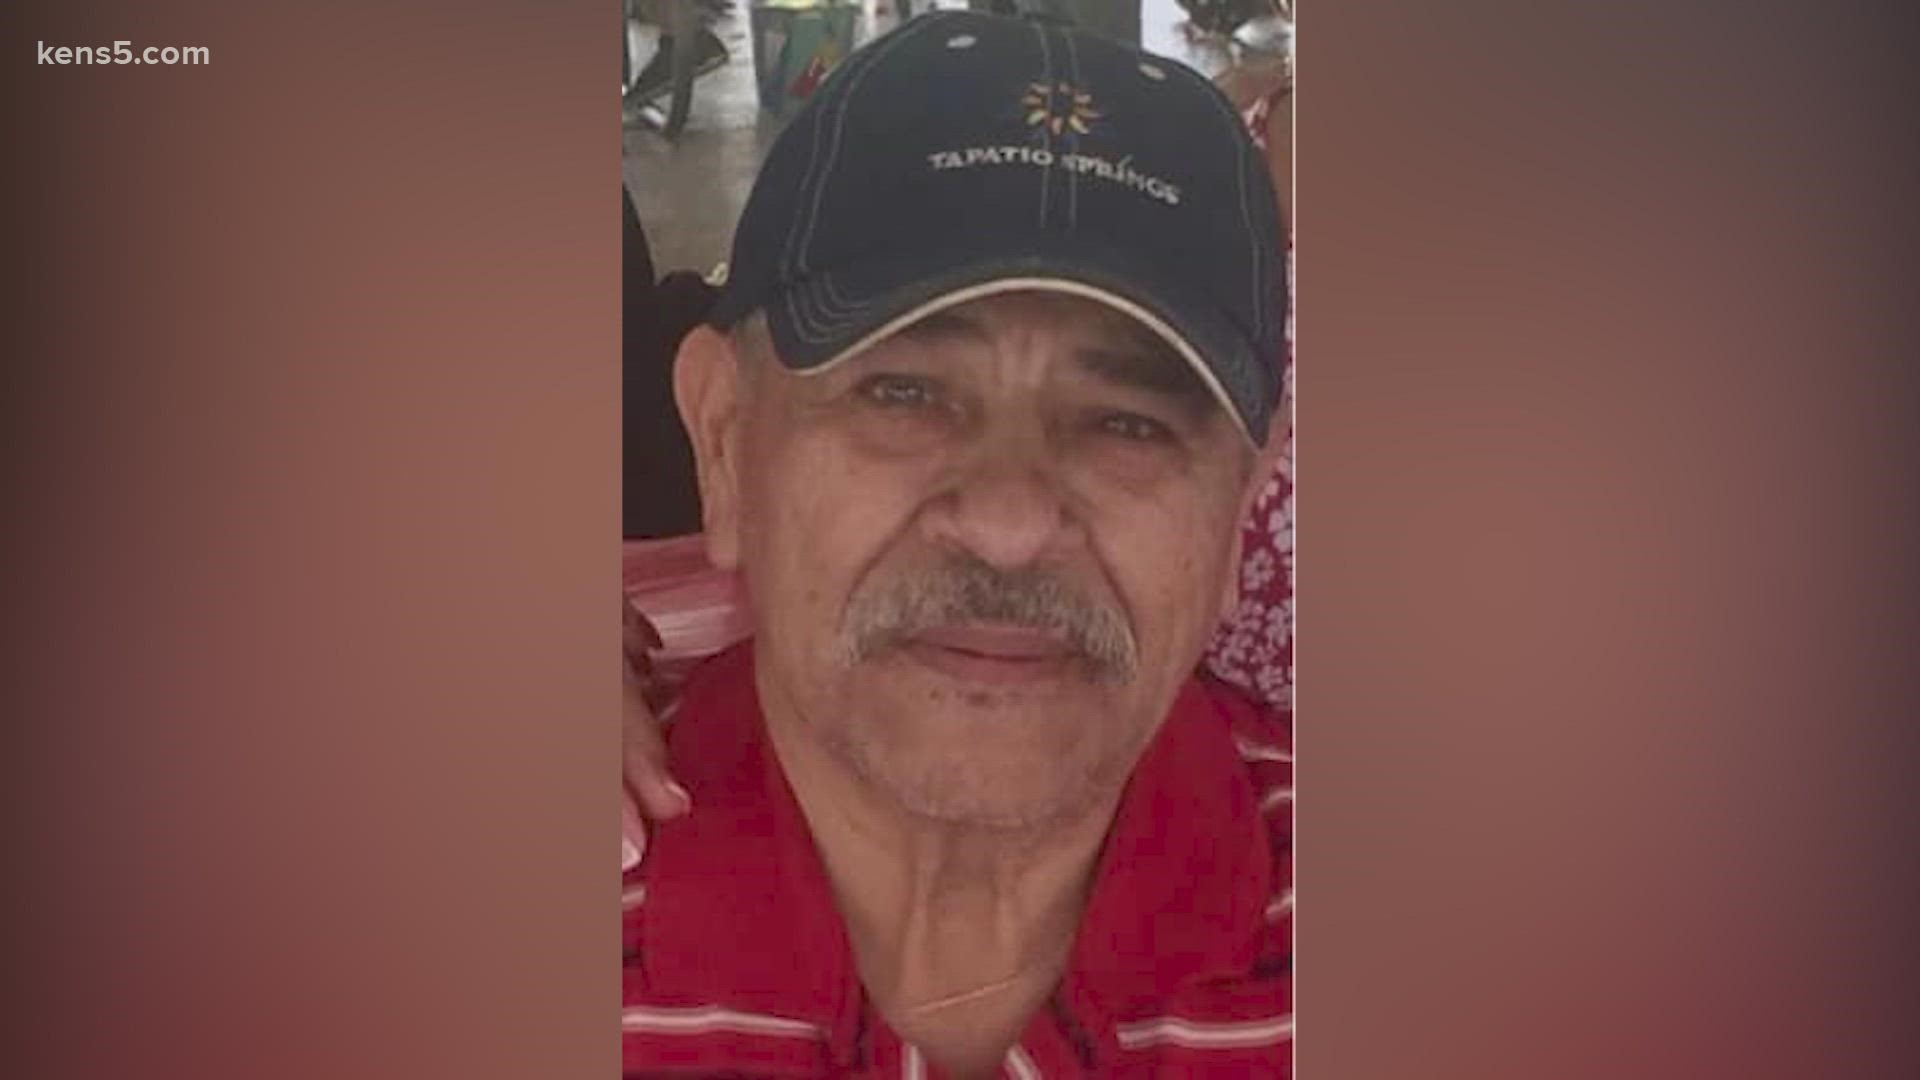 BCSO says Ramiro Acevedo was last seen Sunday, May 8th on Canyon River inHelotes.